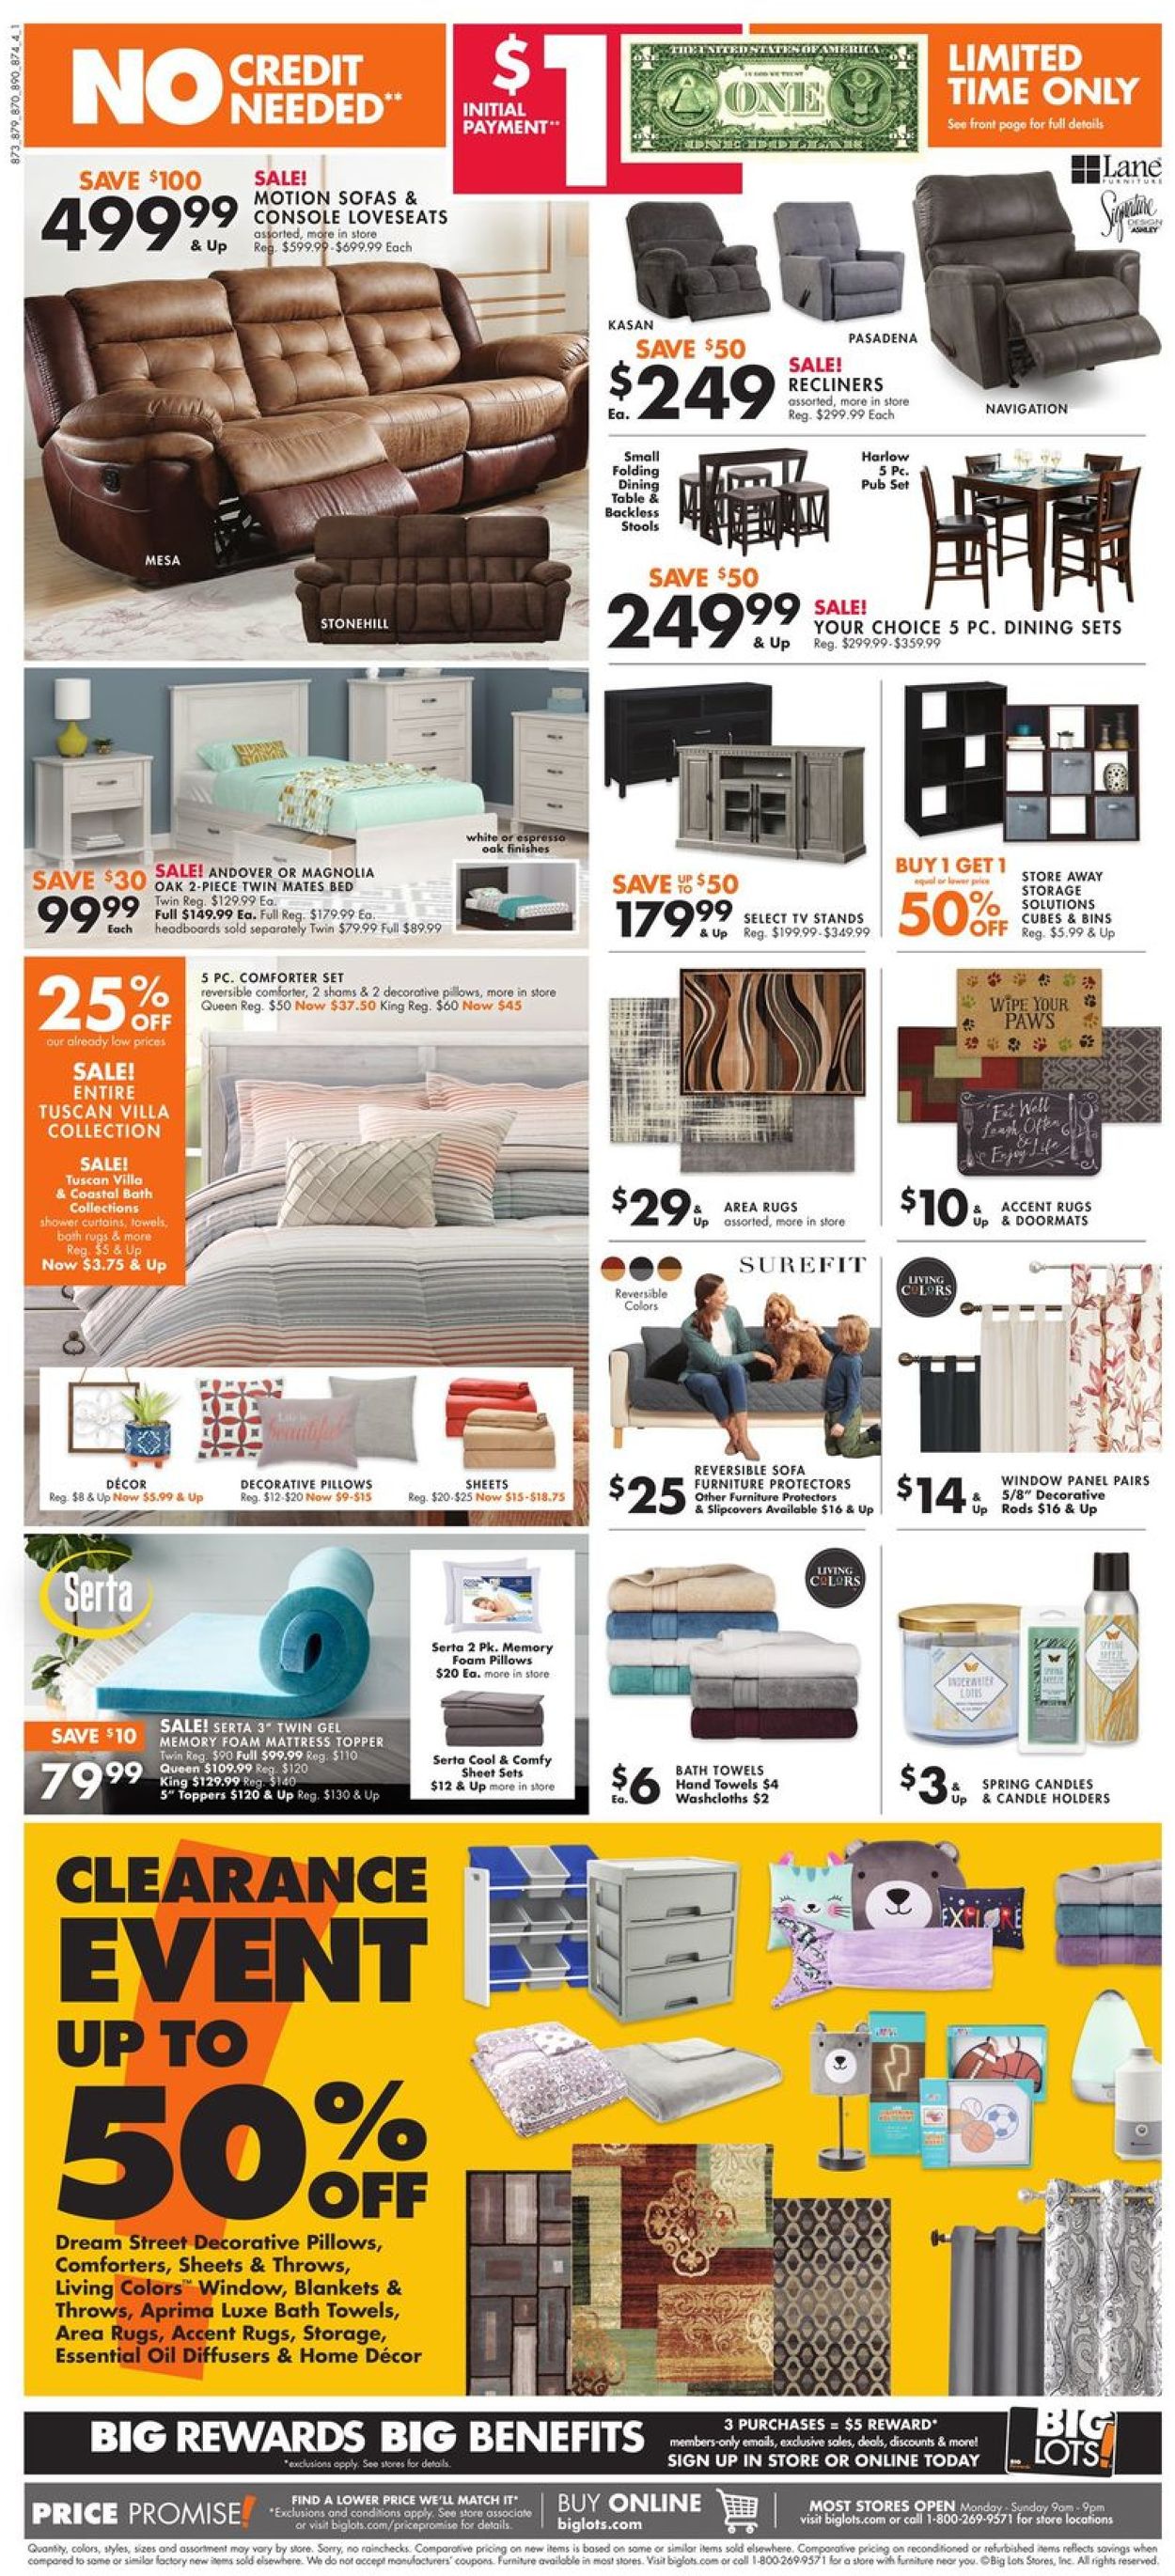 Big Lots Ad from 03/14/2020